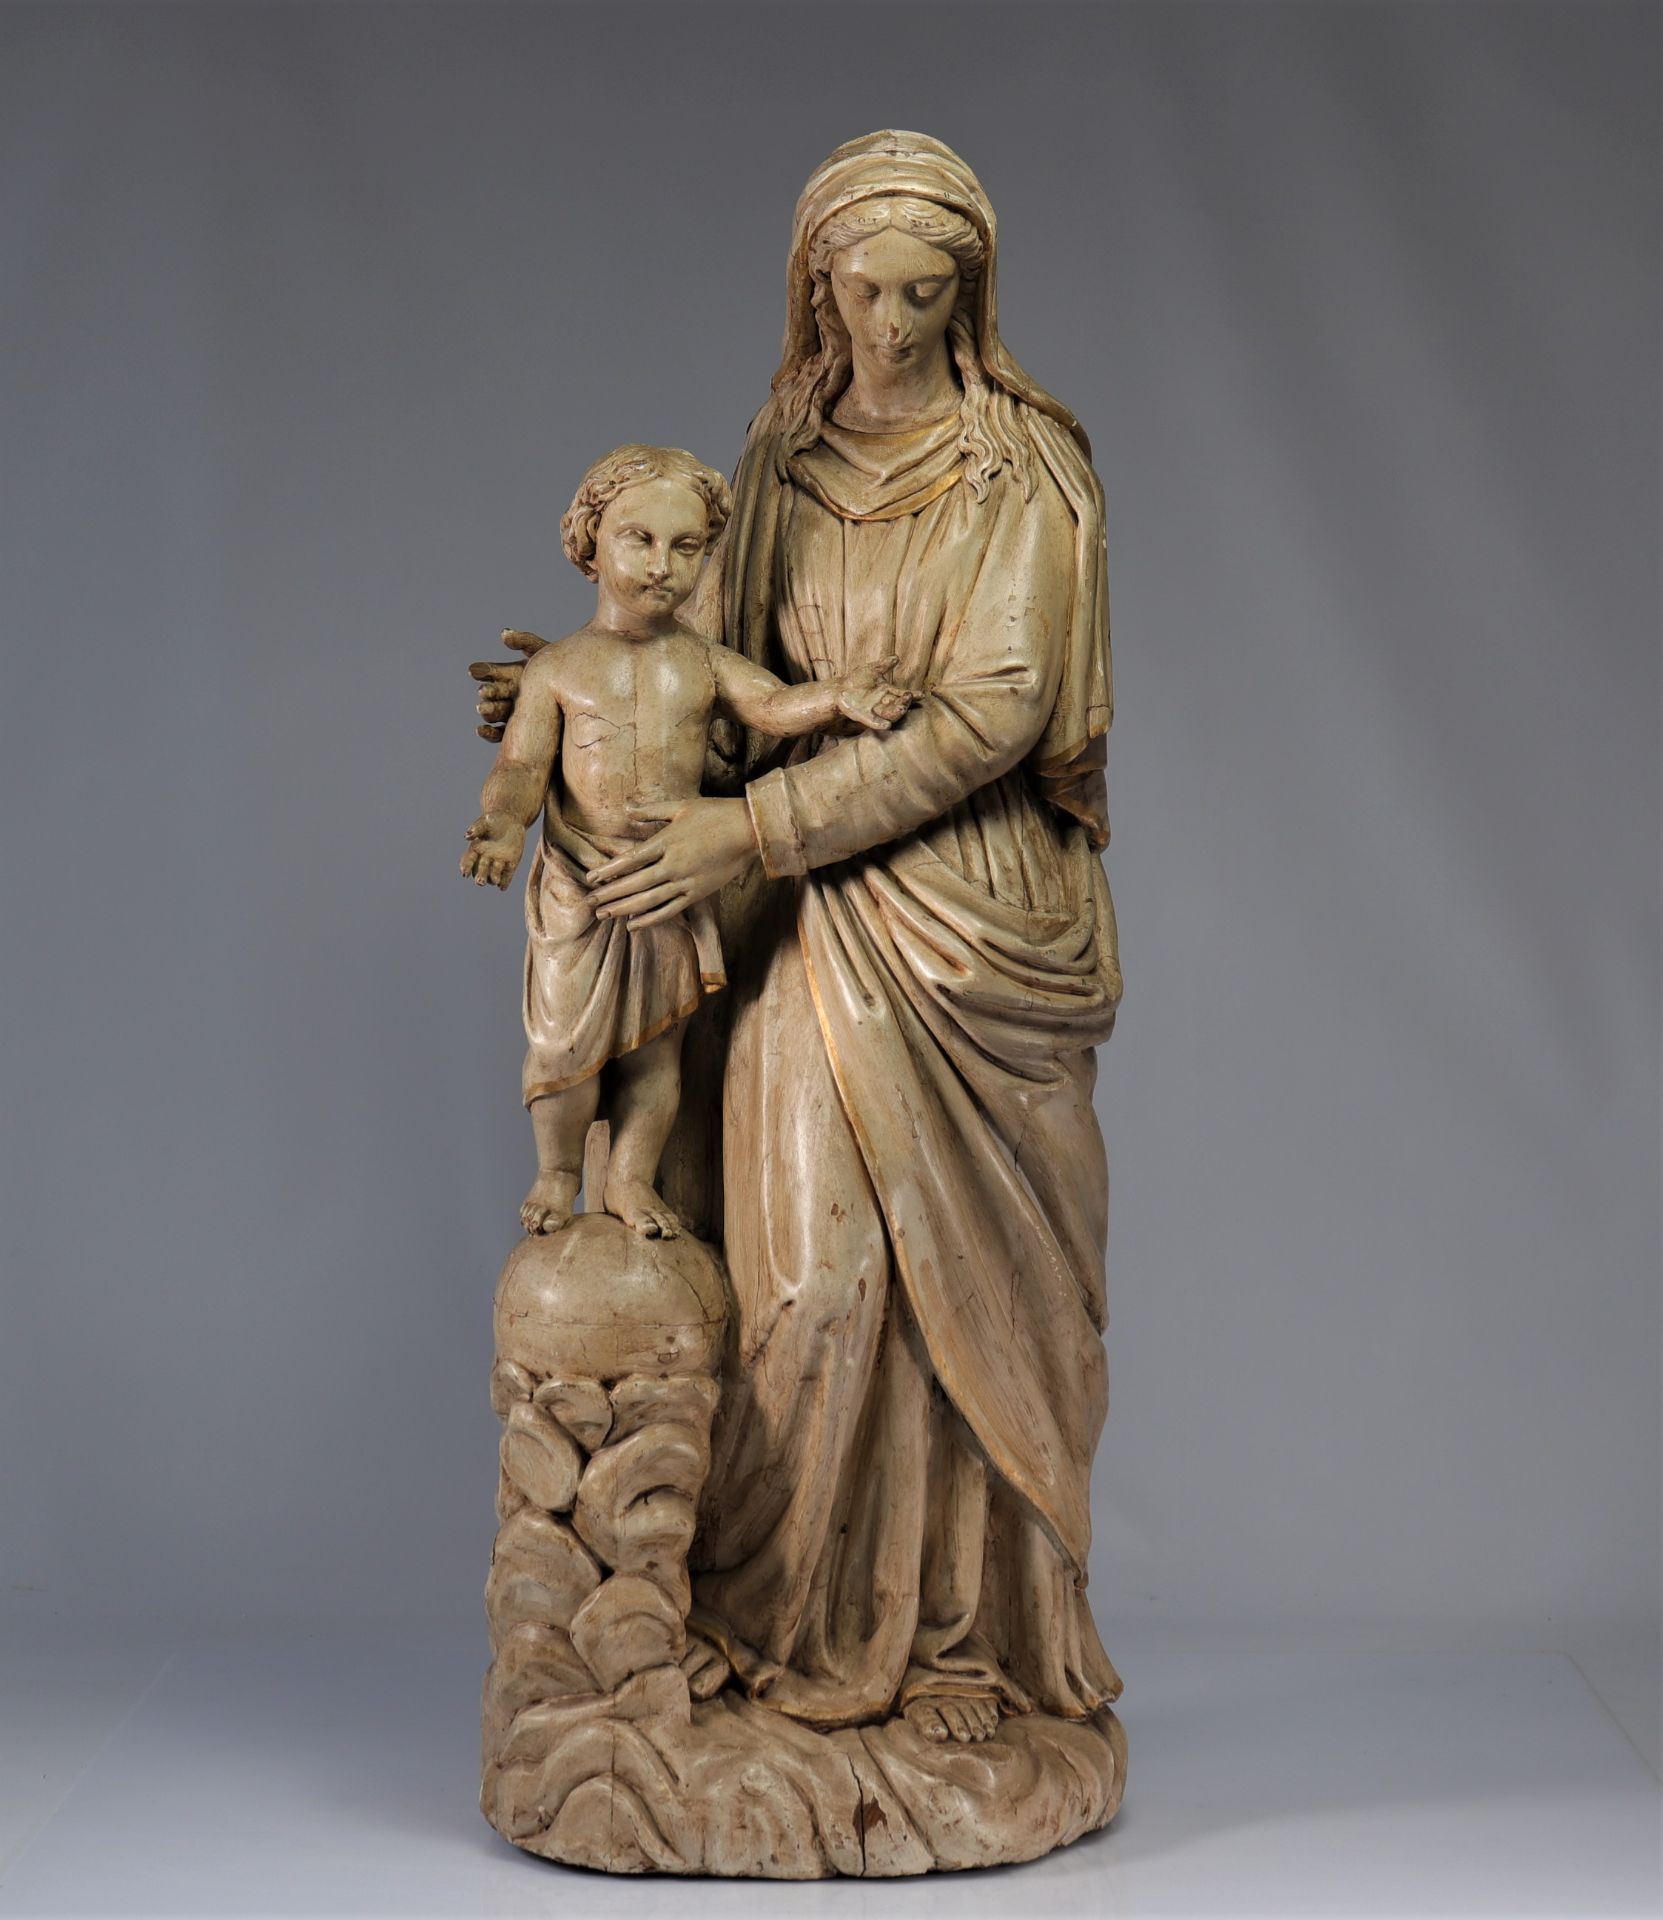 Large wooden sculpture of the Virgin and Child from 17th century - Image 5 of 5